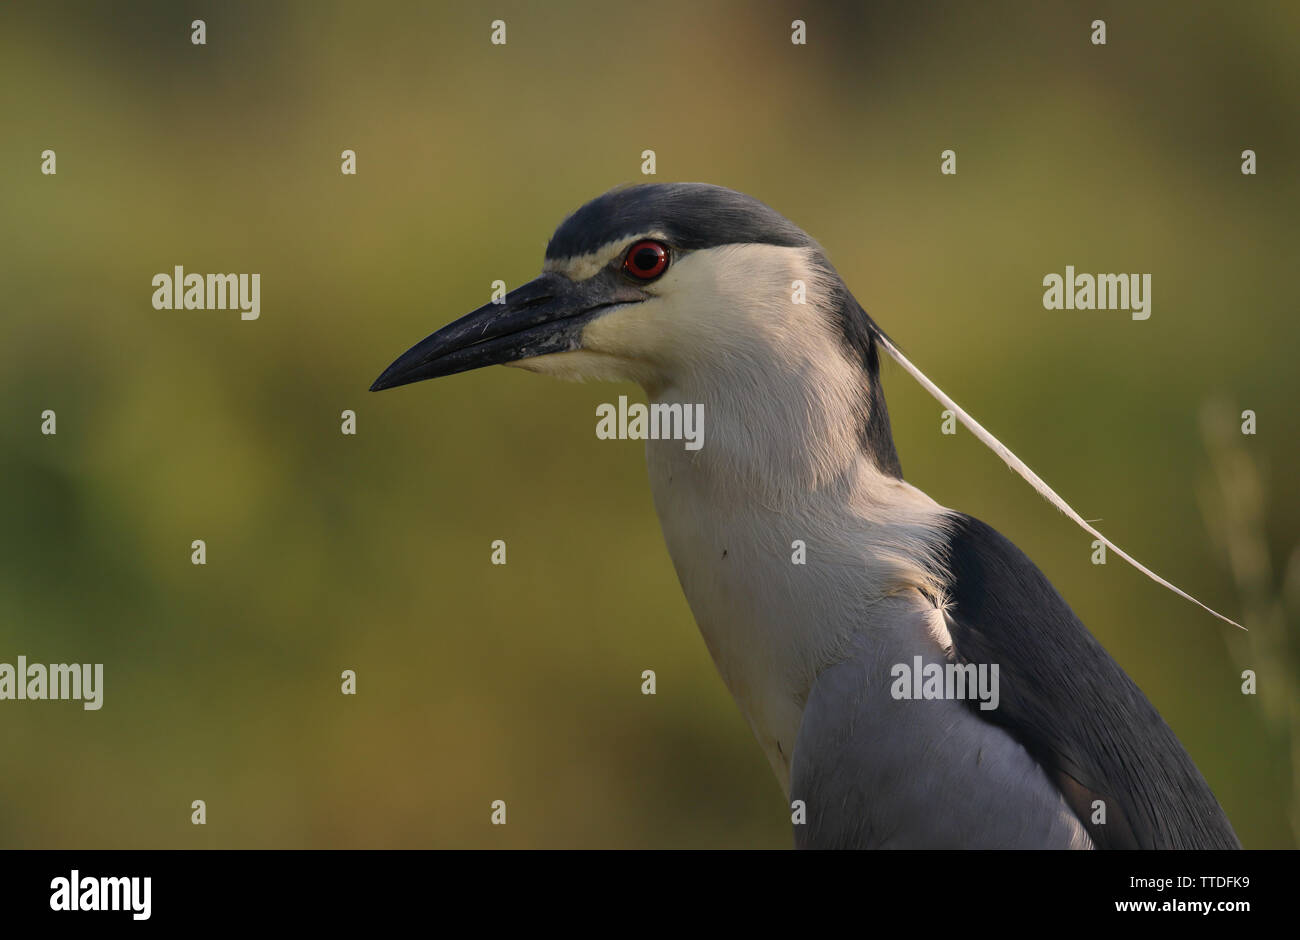 Portrait of Black-crowned night heron (Nycticorax nycticorax), photographed in Hortobagy NP, Hungary Stock Photo